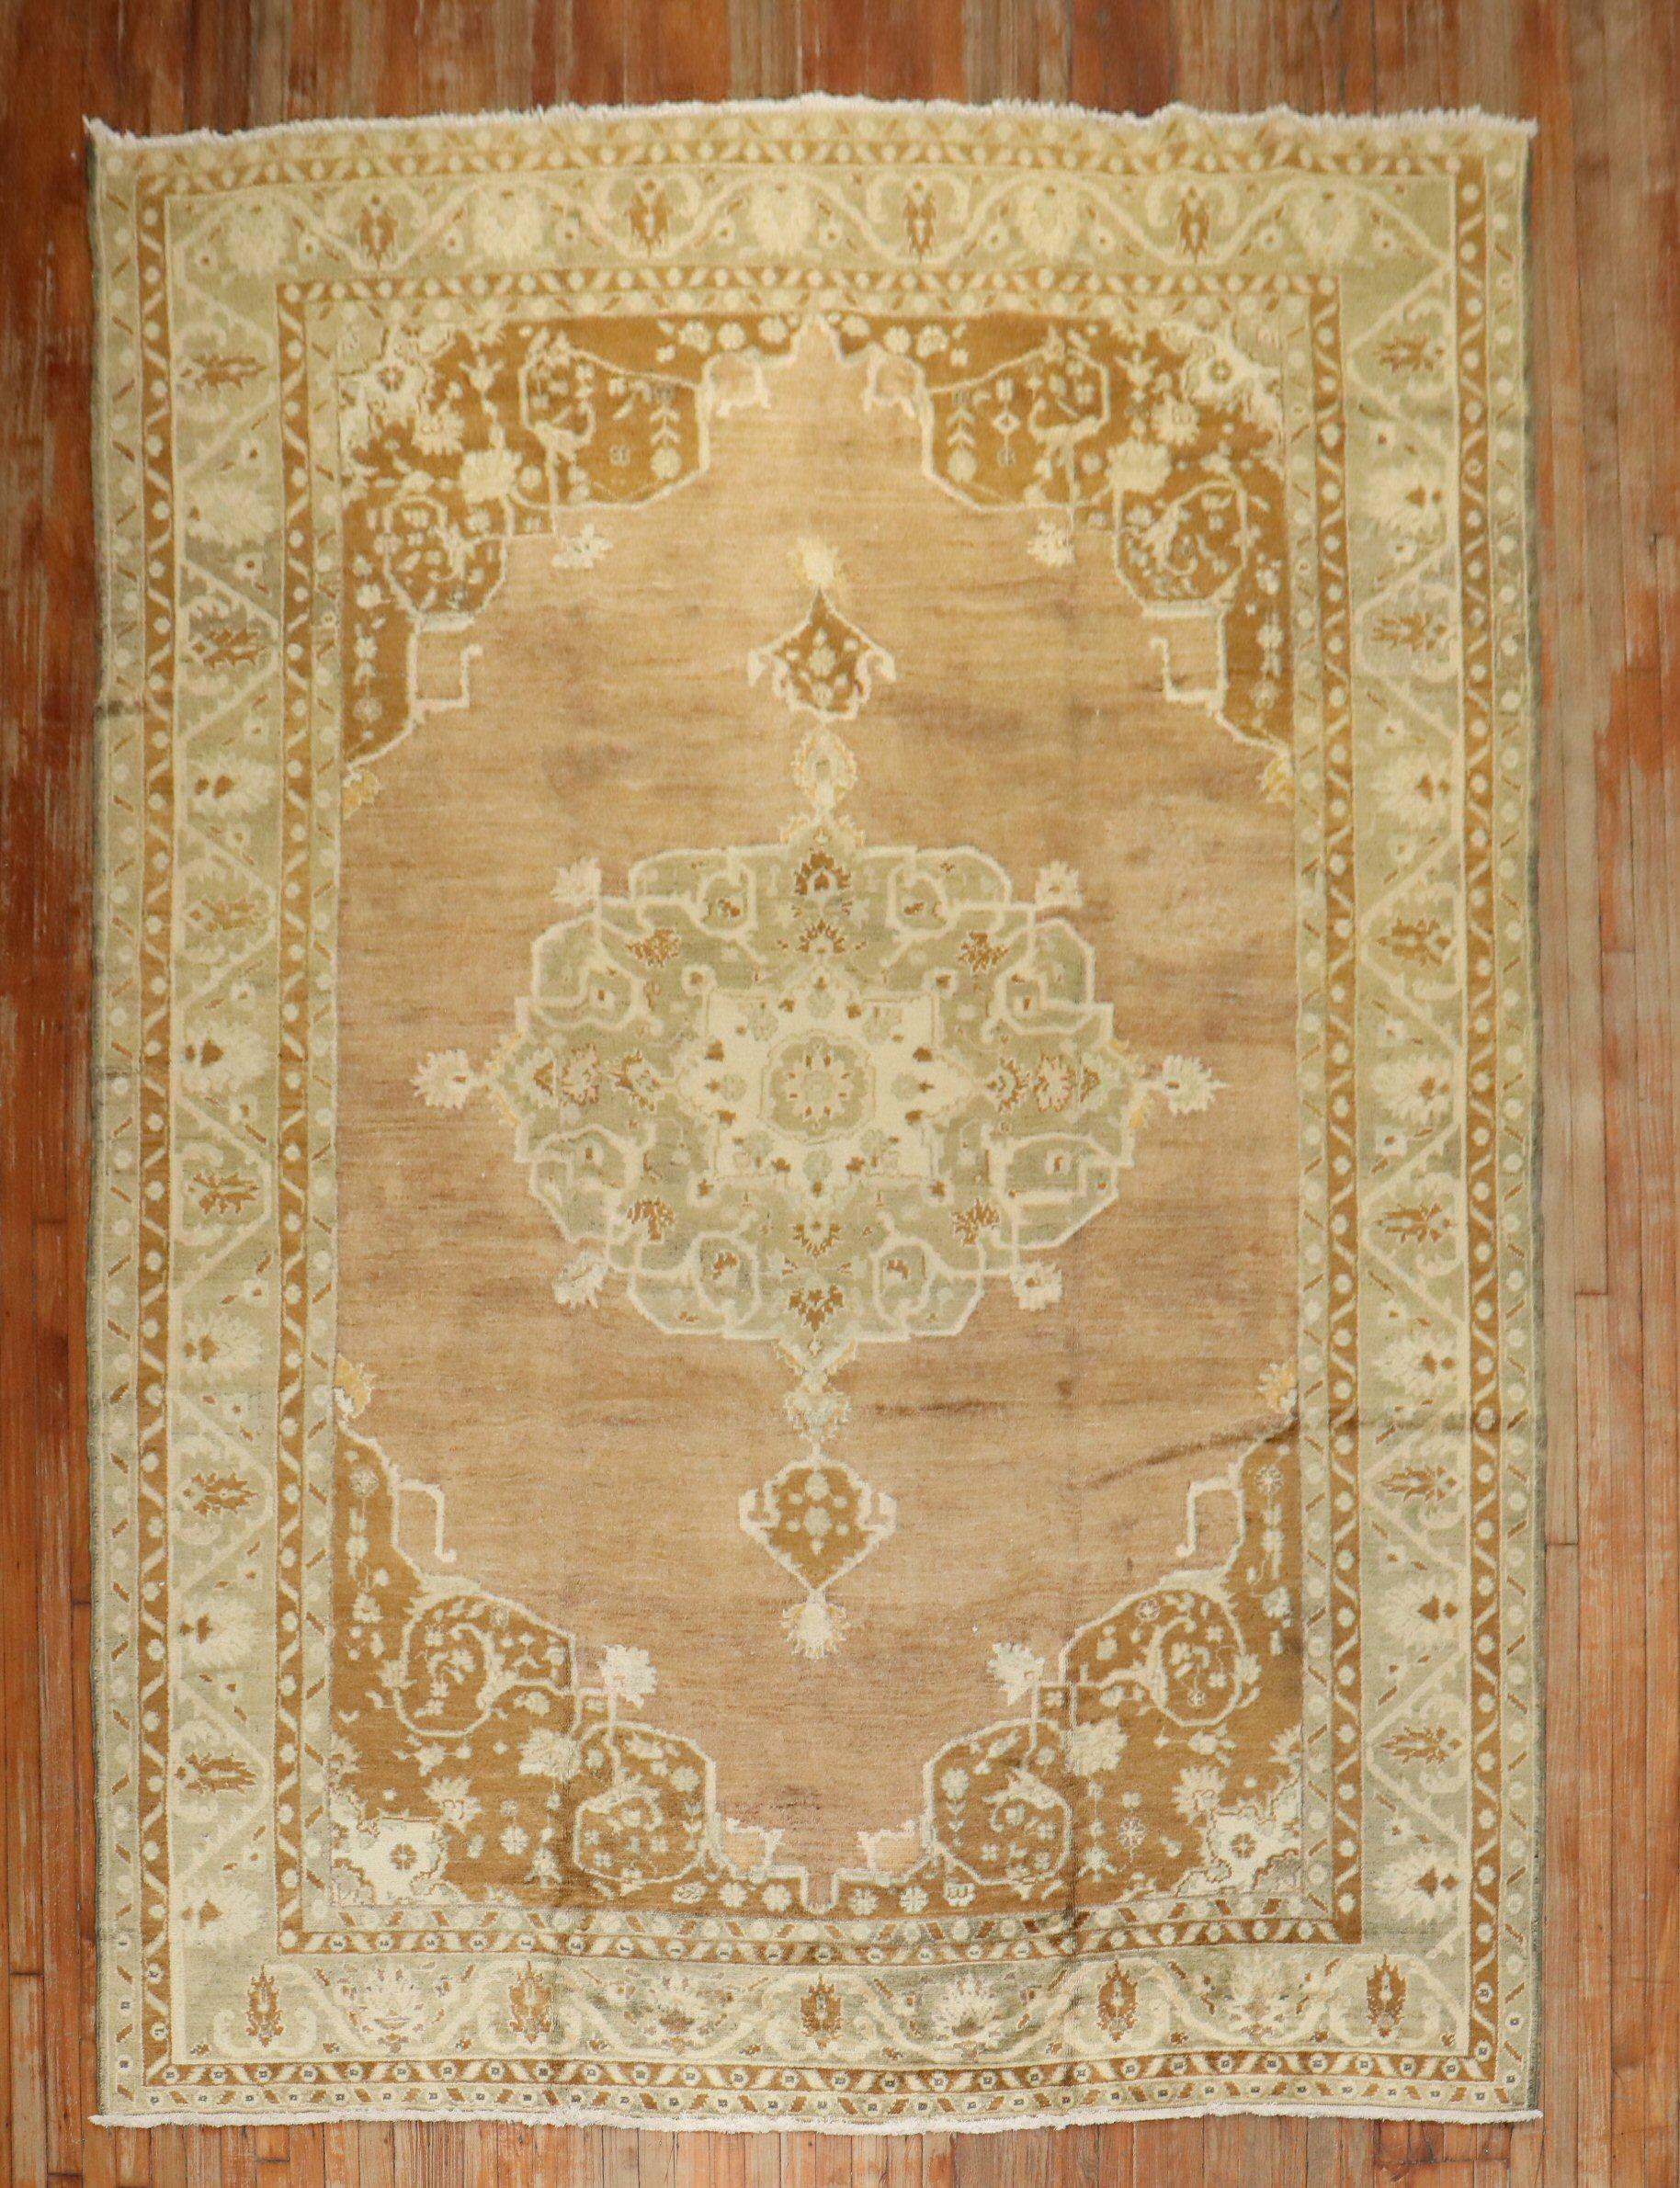 a mid 20th century Turkish Room Size Rug in brown and green

Measures: 7'11'' x 11'6